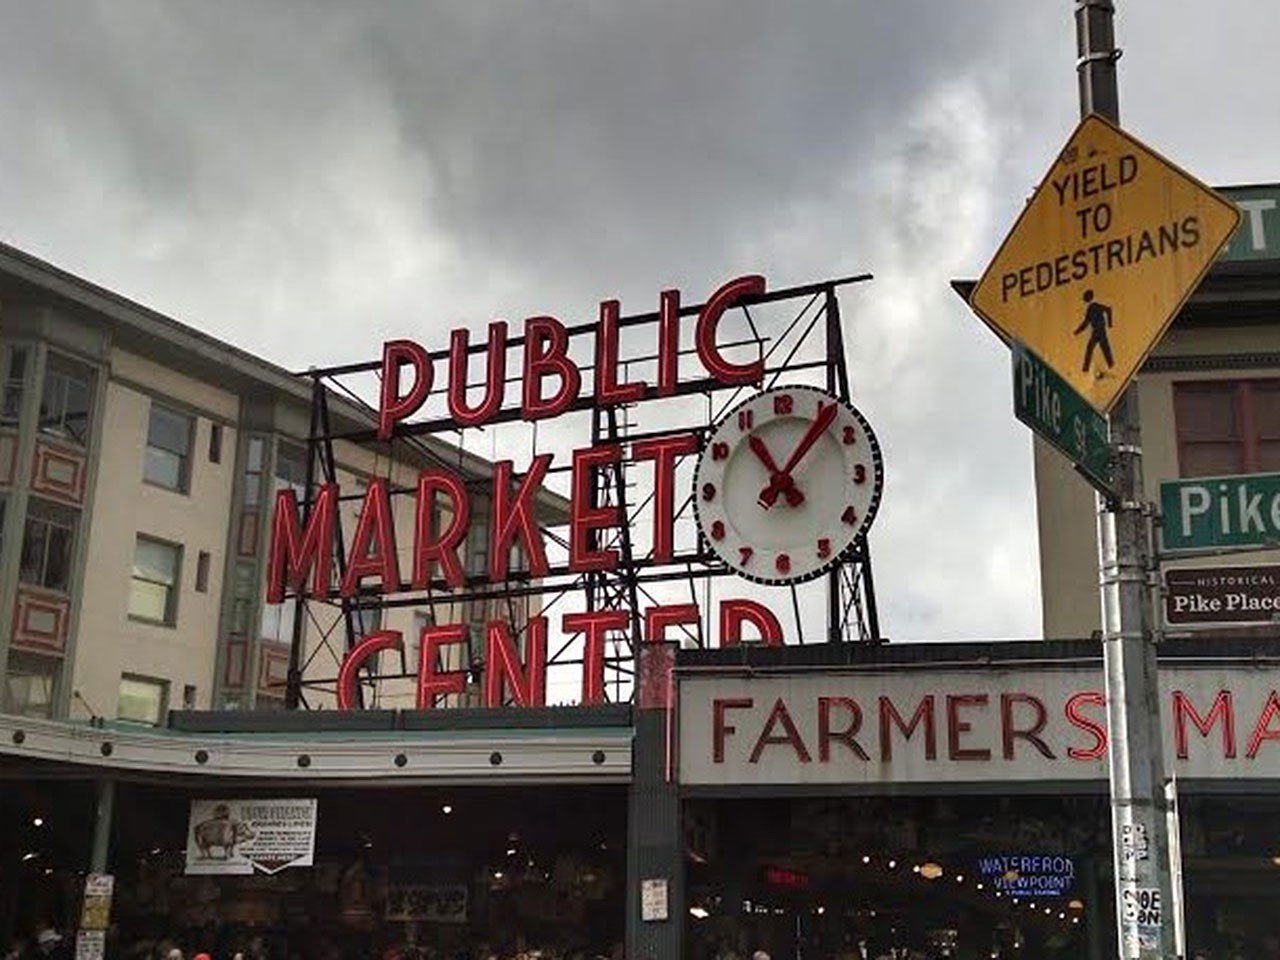 Be a Foodie Tourist at Pike Place